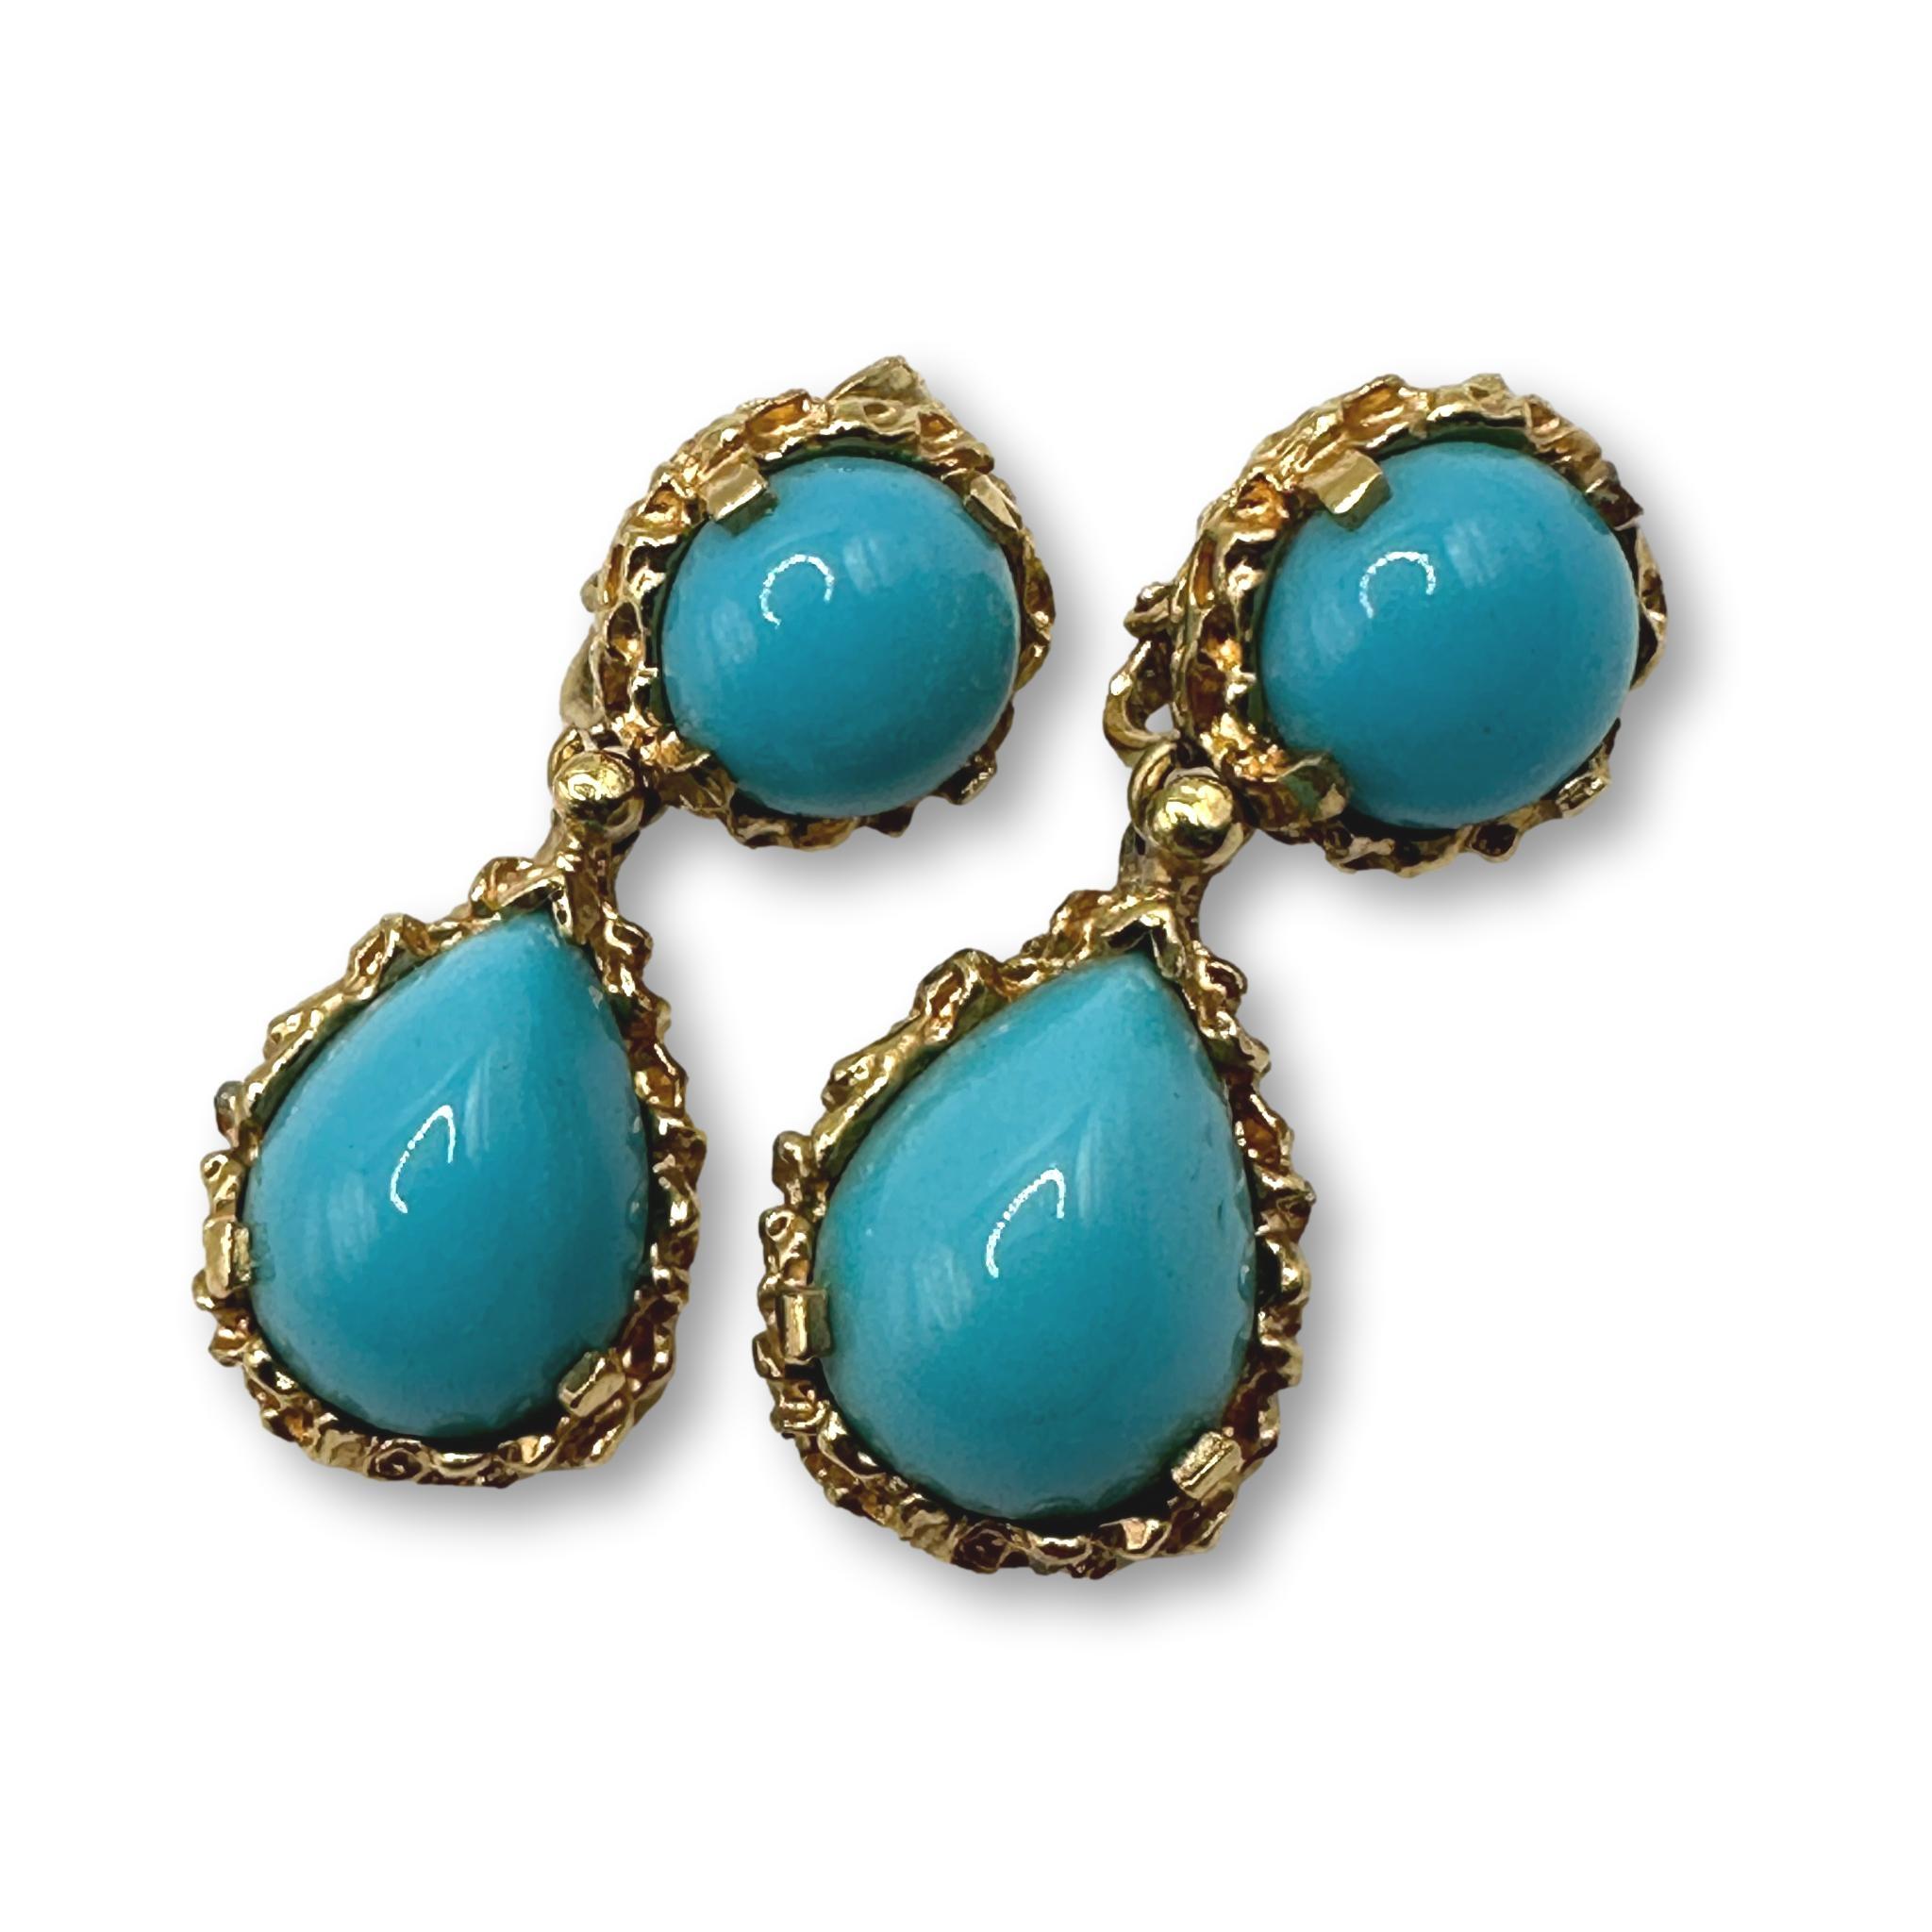 Vintage Panetta Brutalist Faux Turquoise Clip-on Earrings